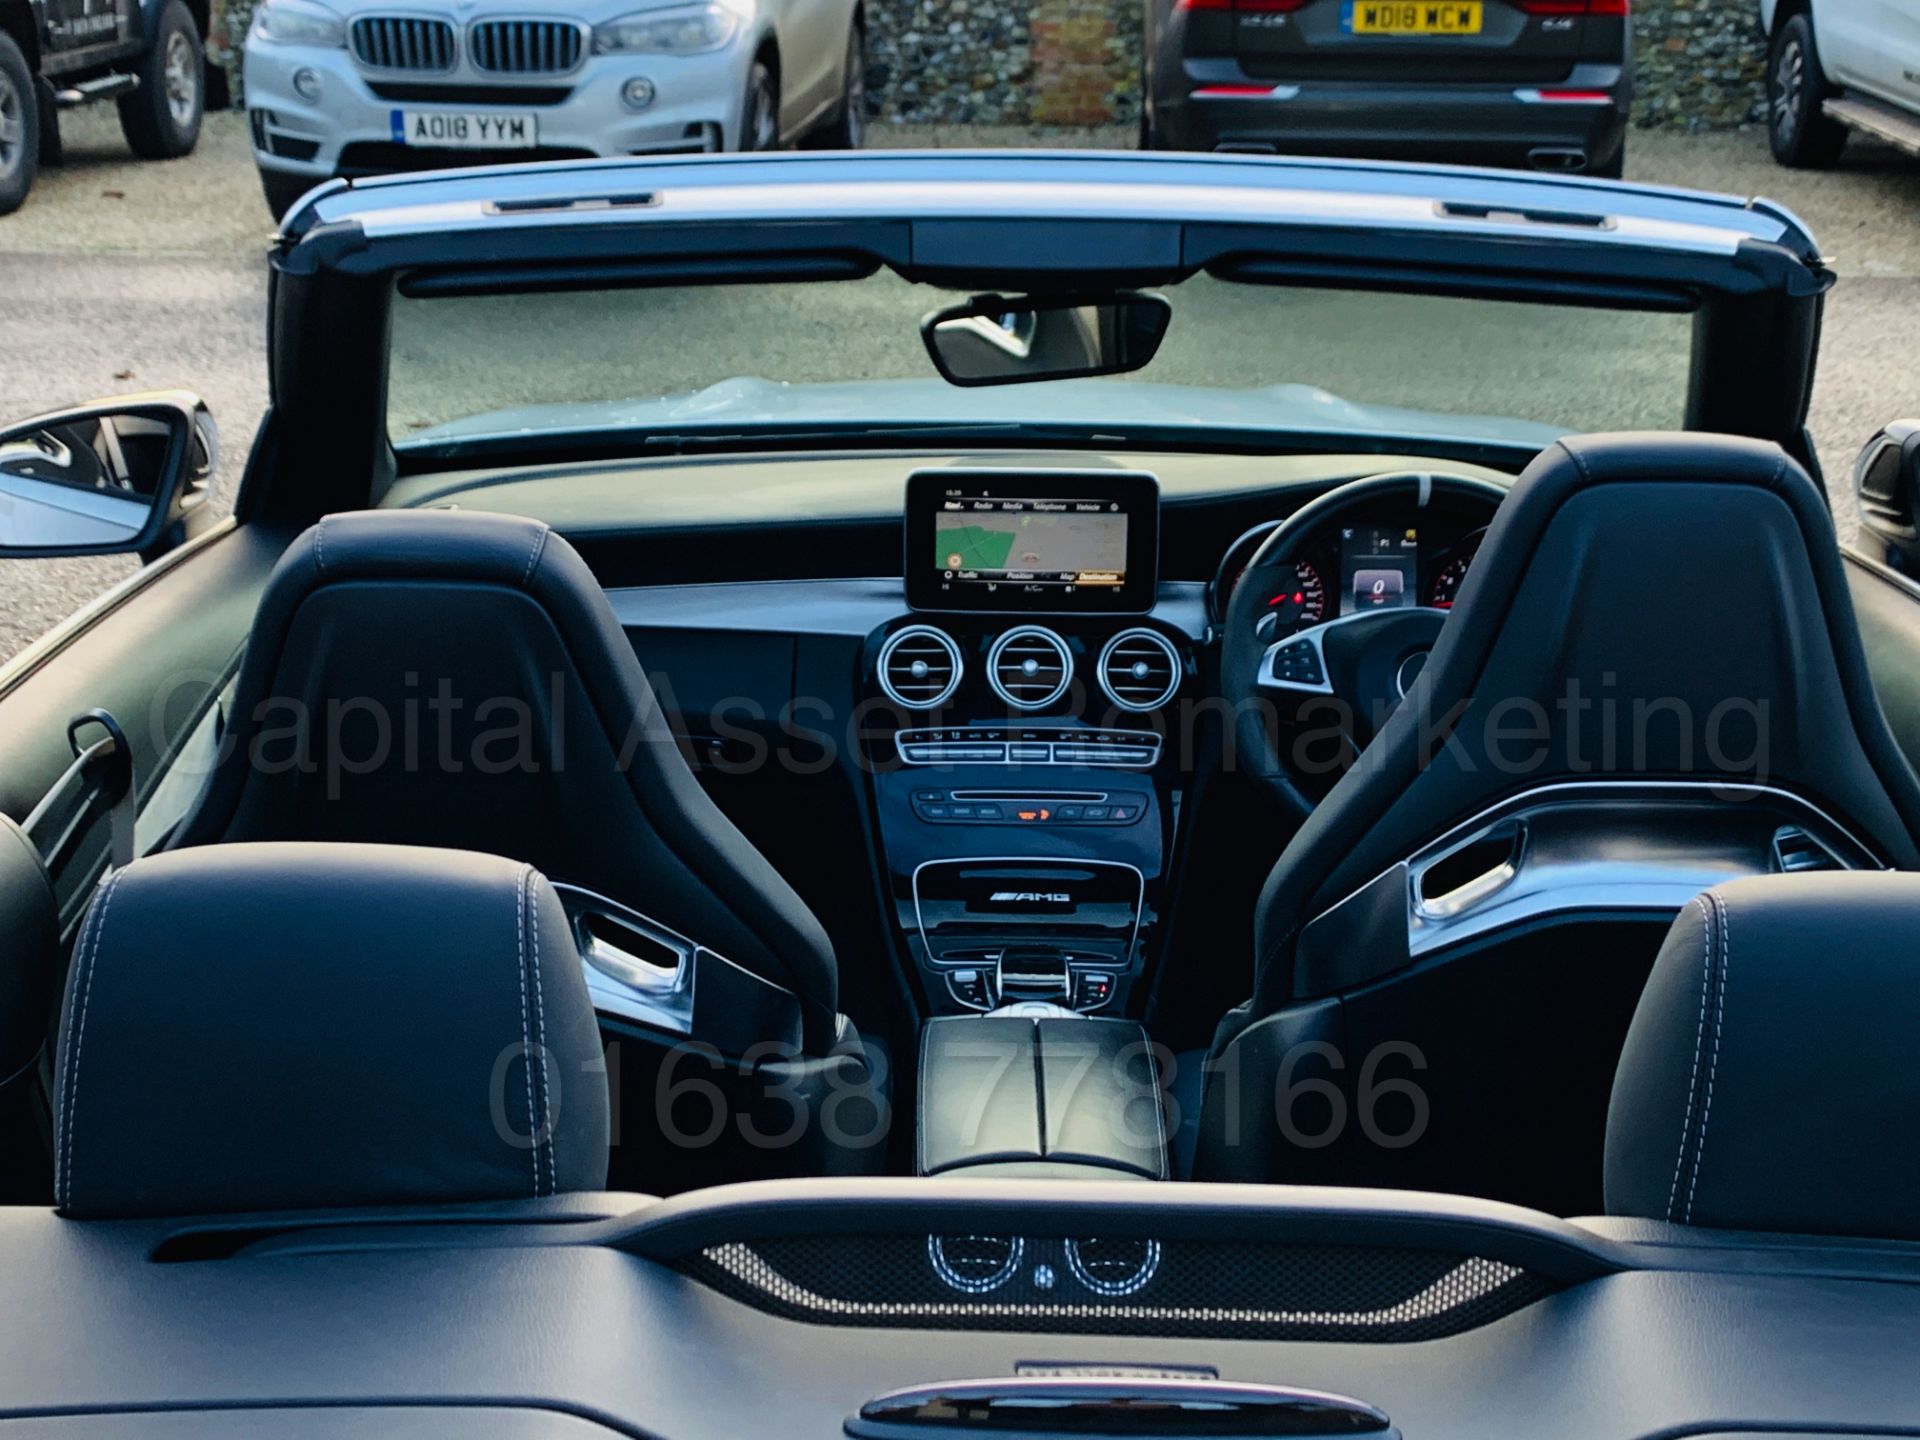 (On Sale) MERCEDES-BENZ AMG C63-S *CABRIOLET* (67 REG) '4.0 BI-TURBO -510 BHP - AUTO' *FULLY LOADED* - Image 50 of 79